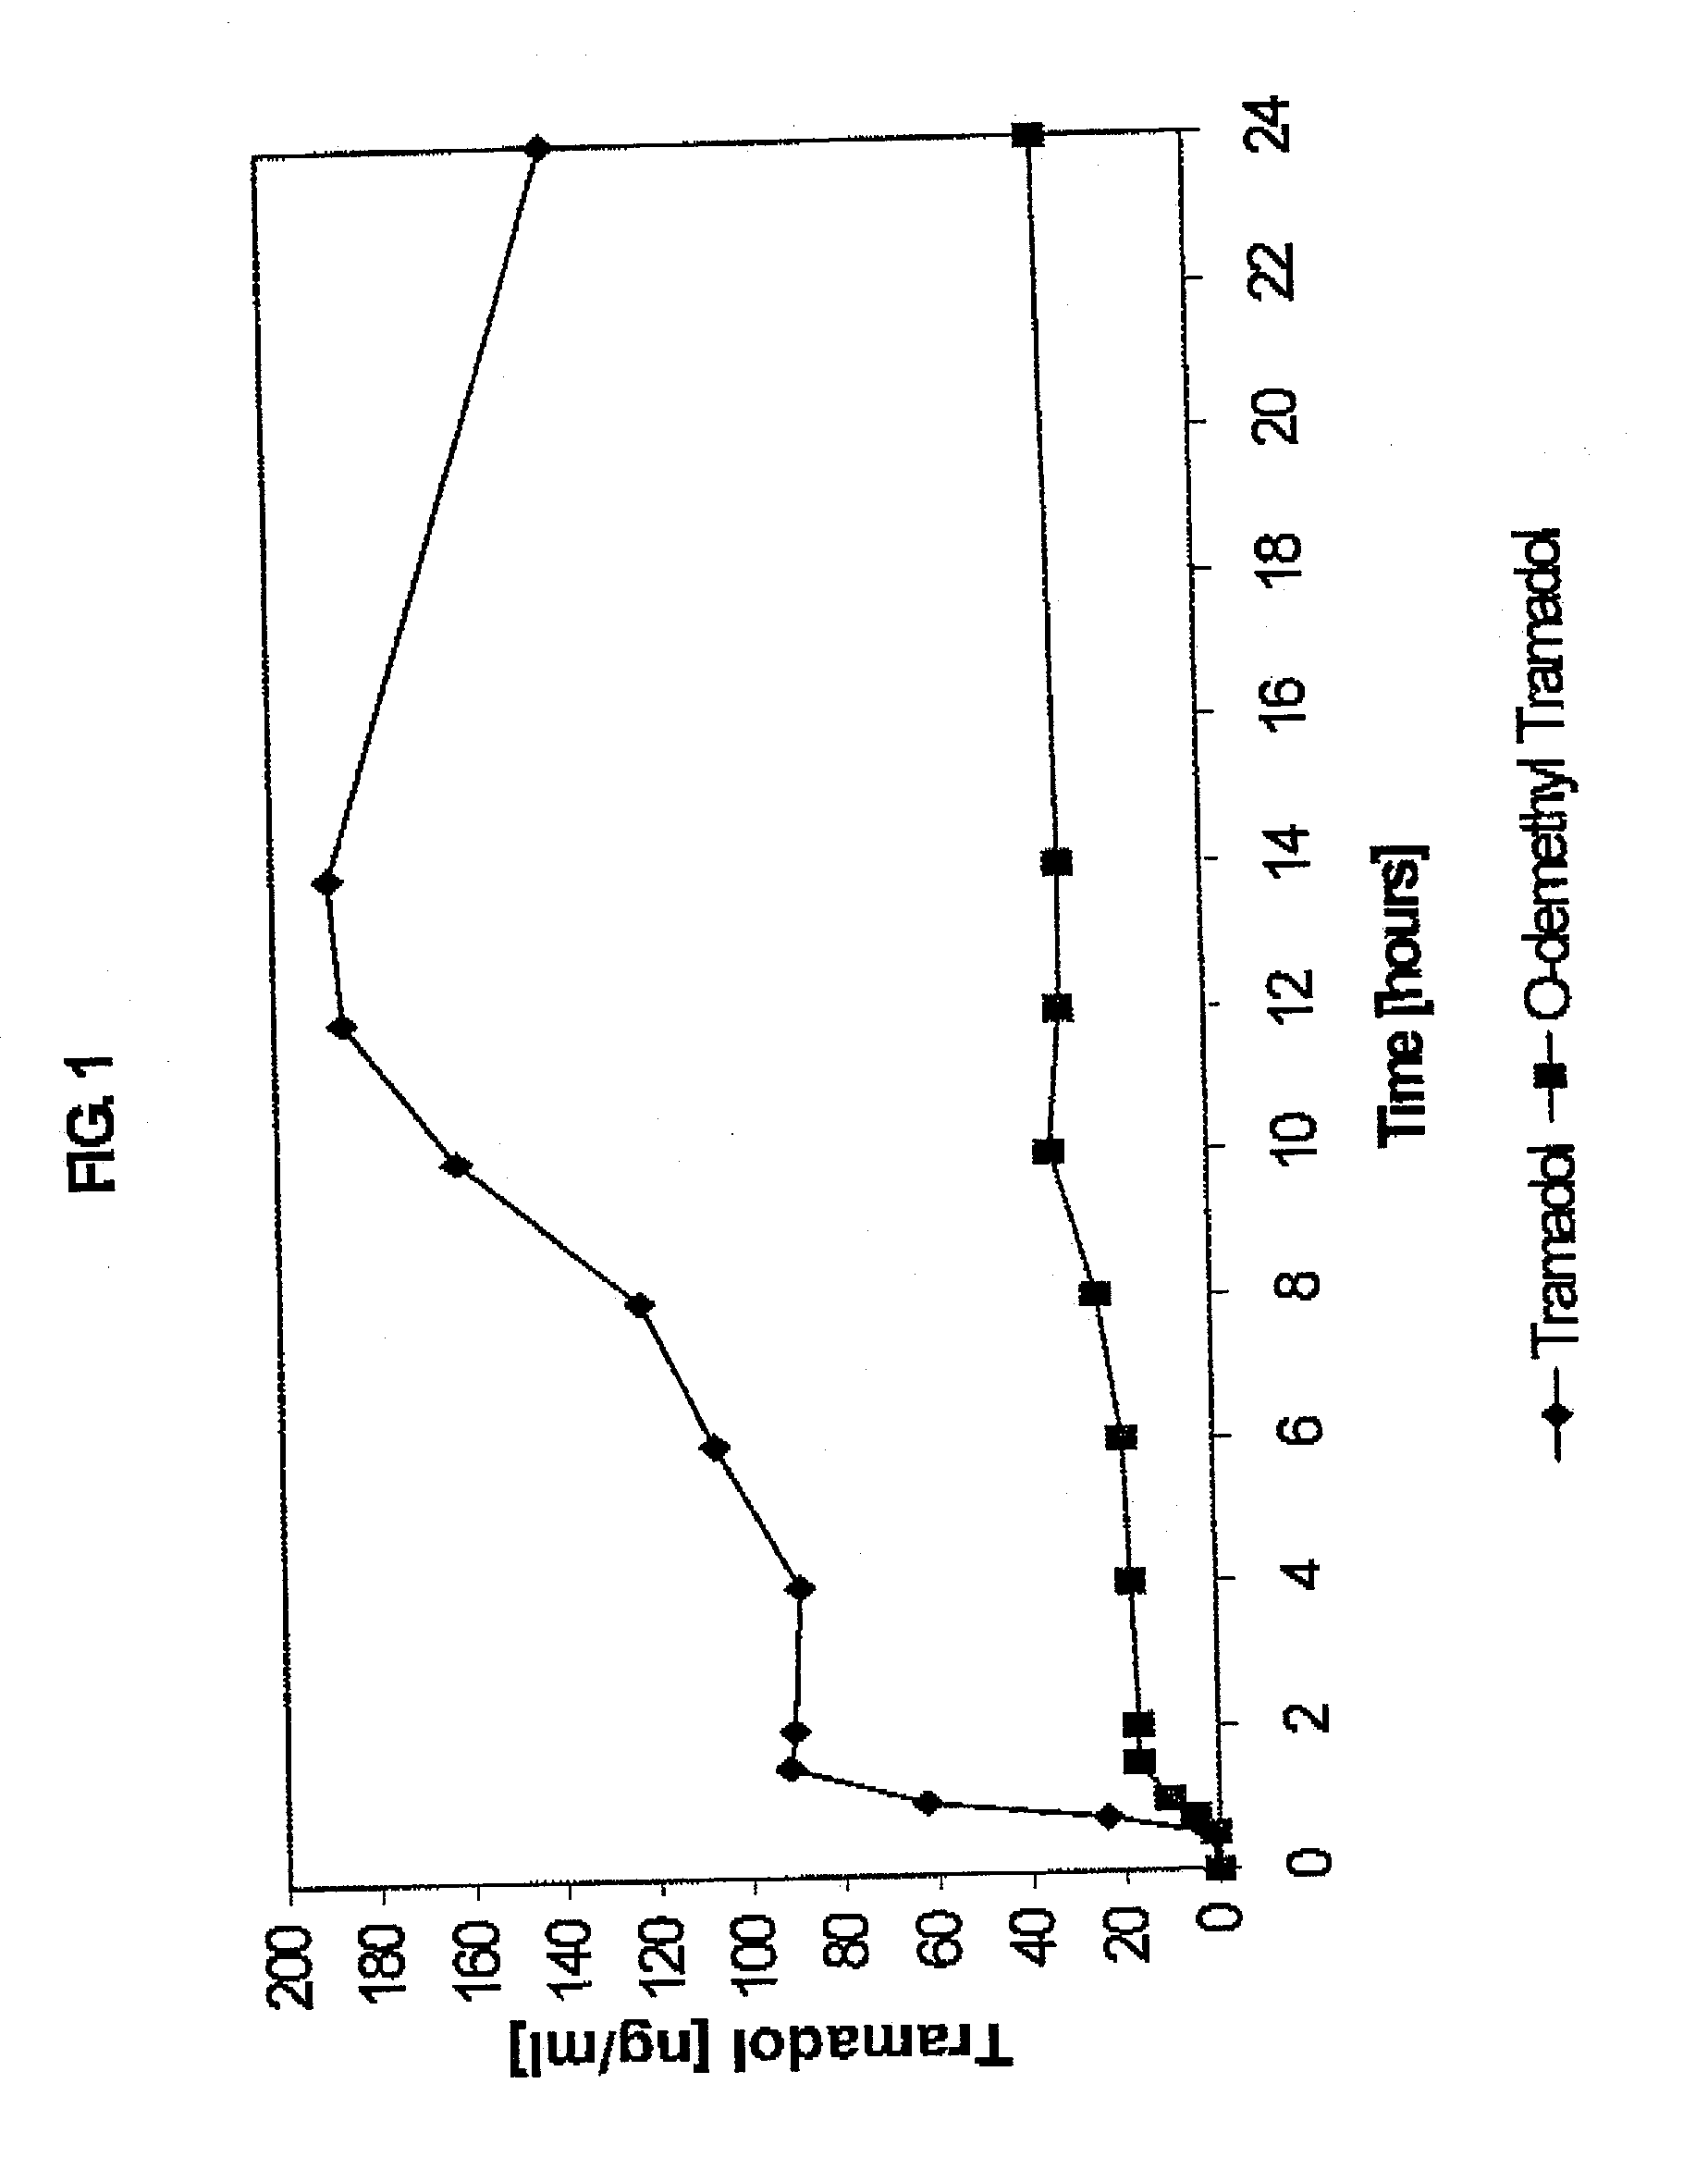 Extended release composition containing Tramadol